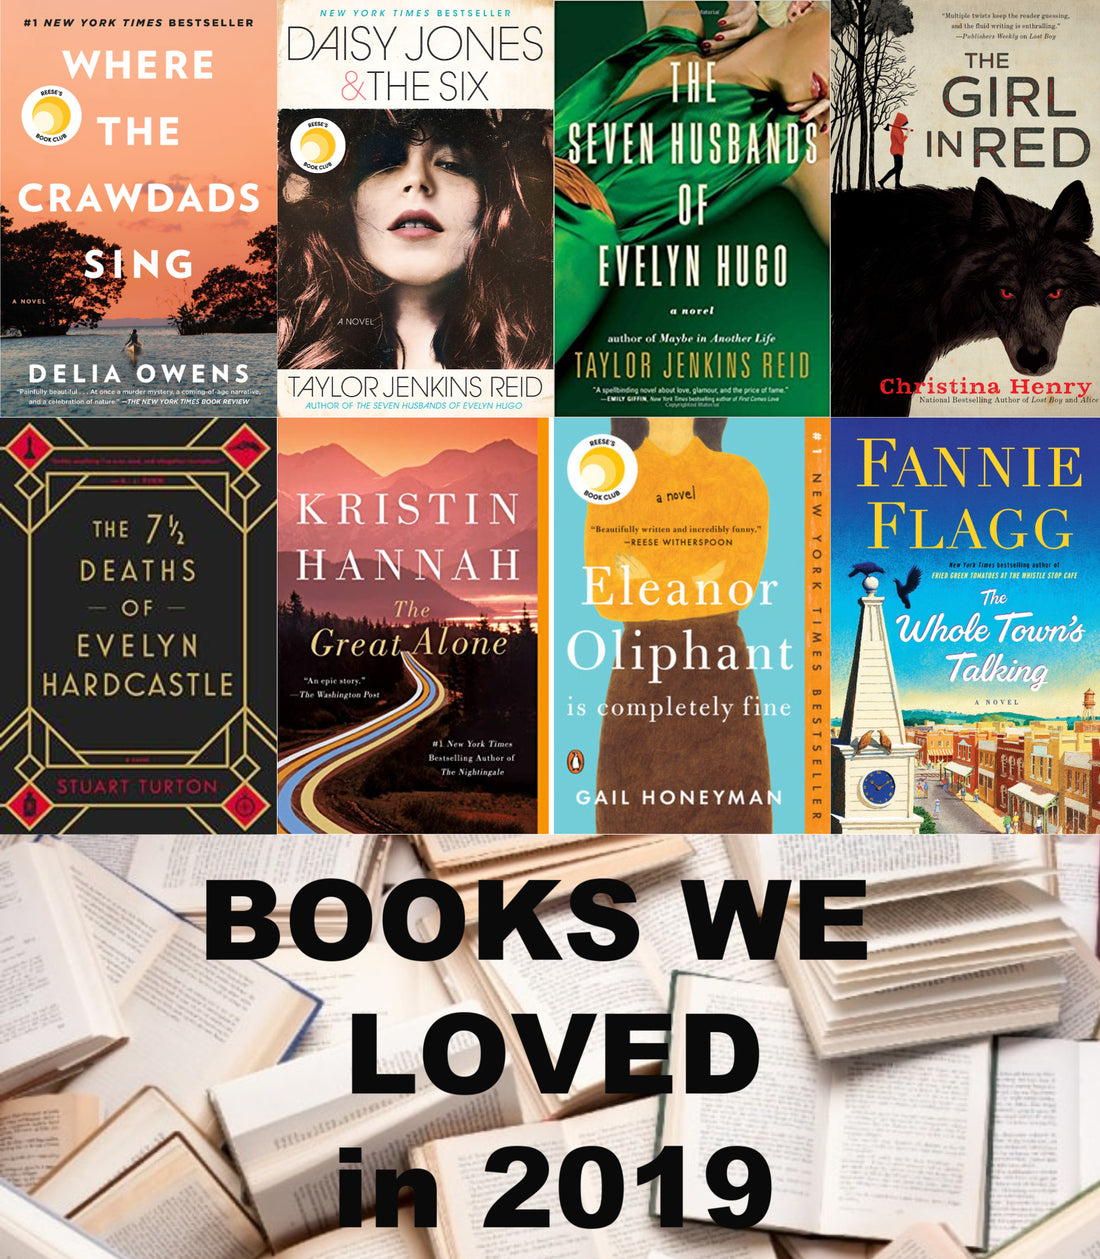 Books We Loved in 2019